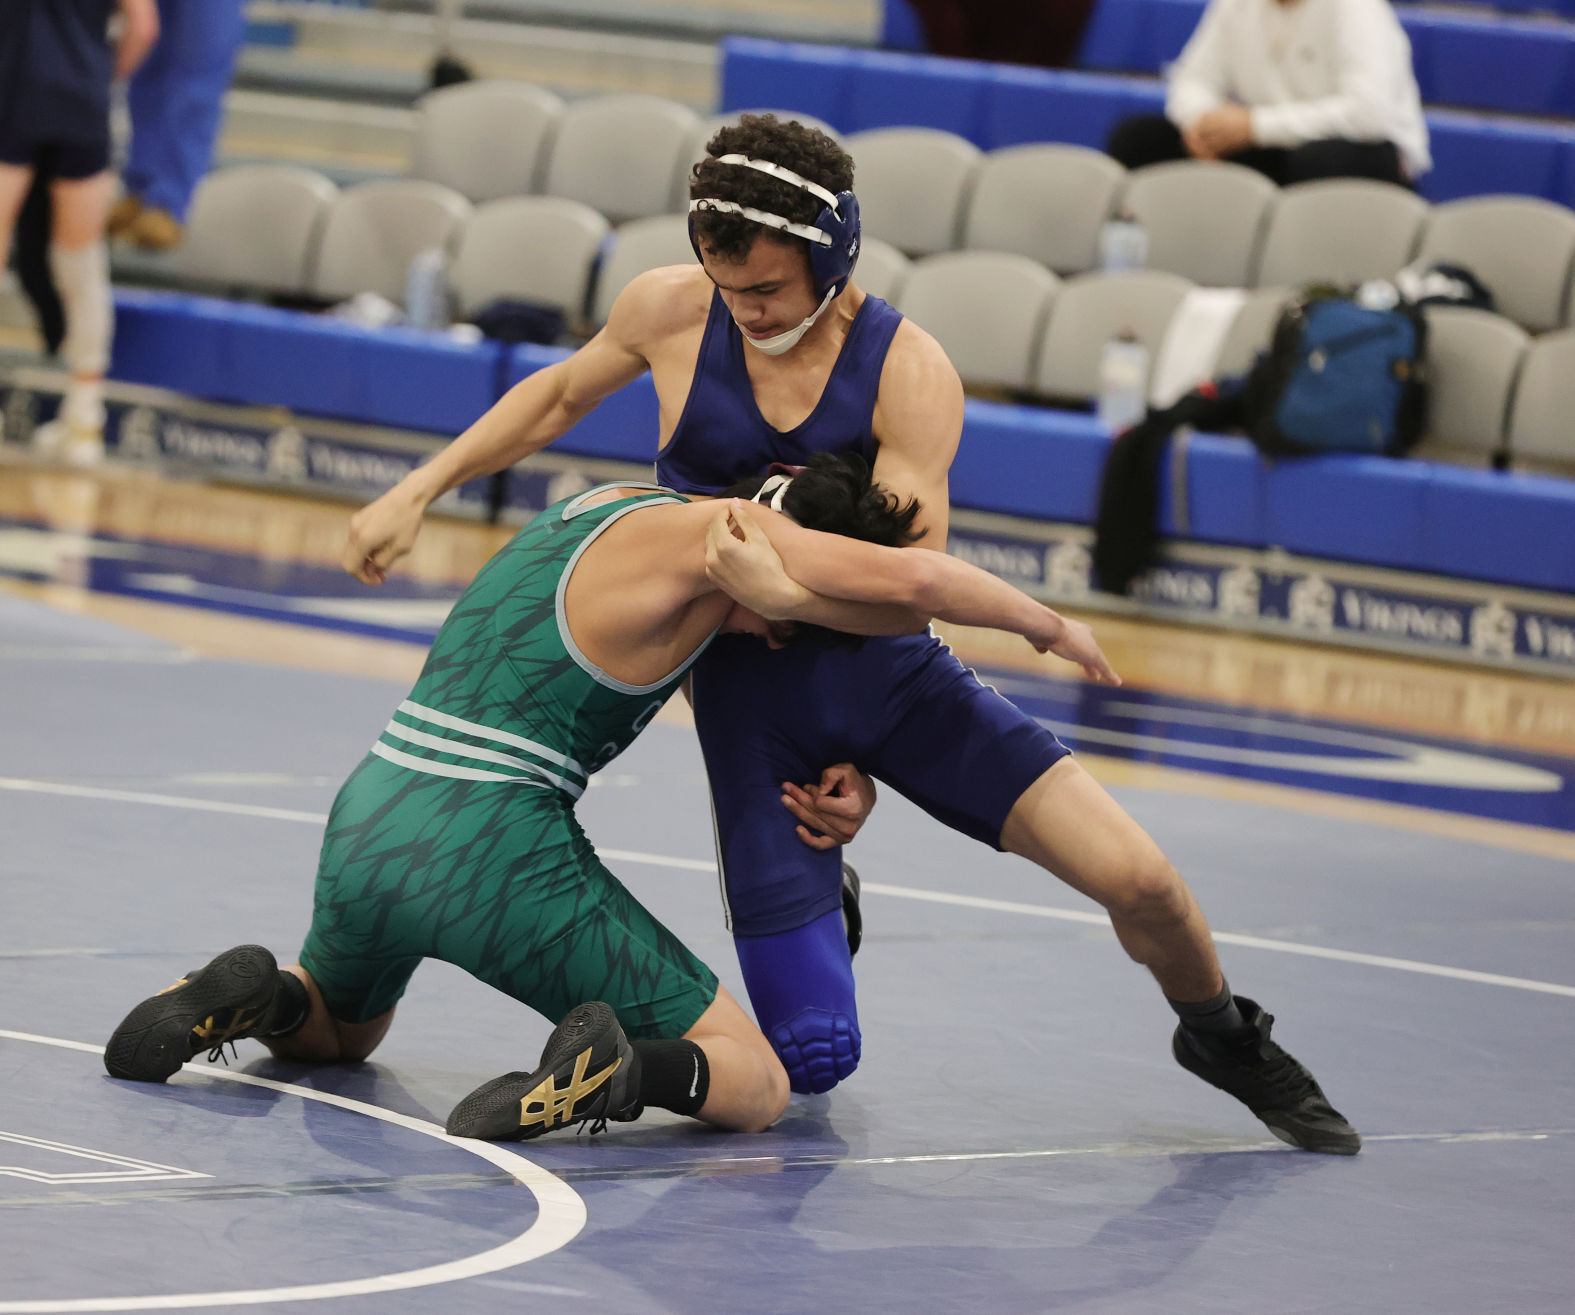 Atlantic City wins 2 of 3 contested bouts in team loss to Cedar Creek